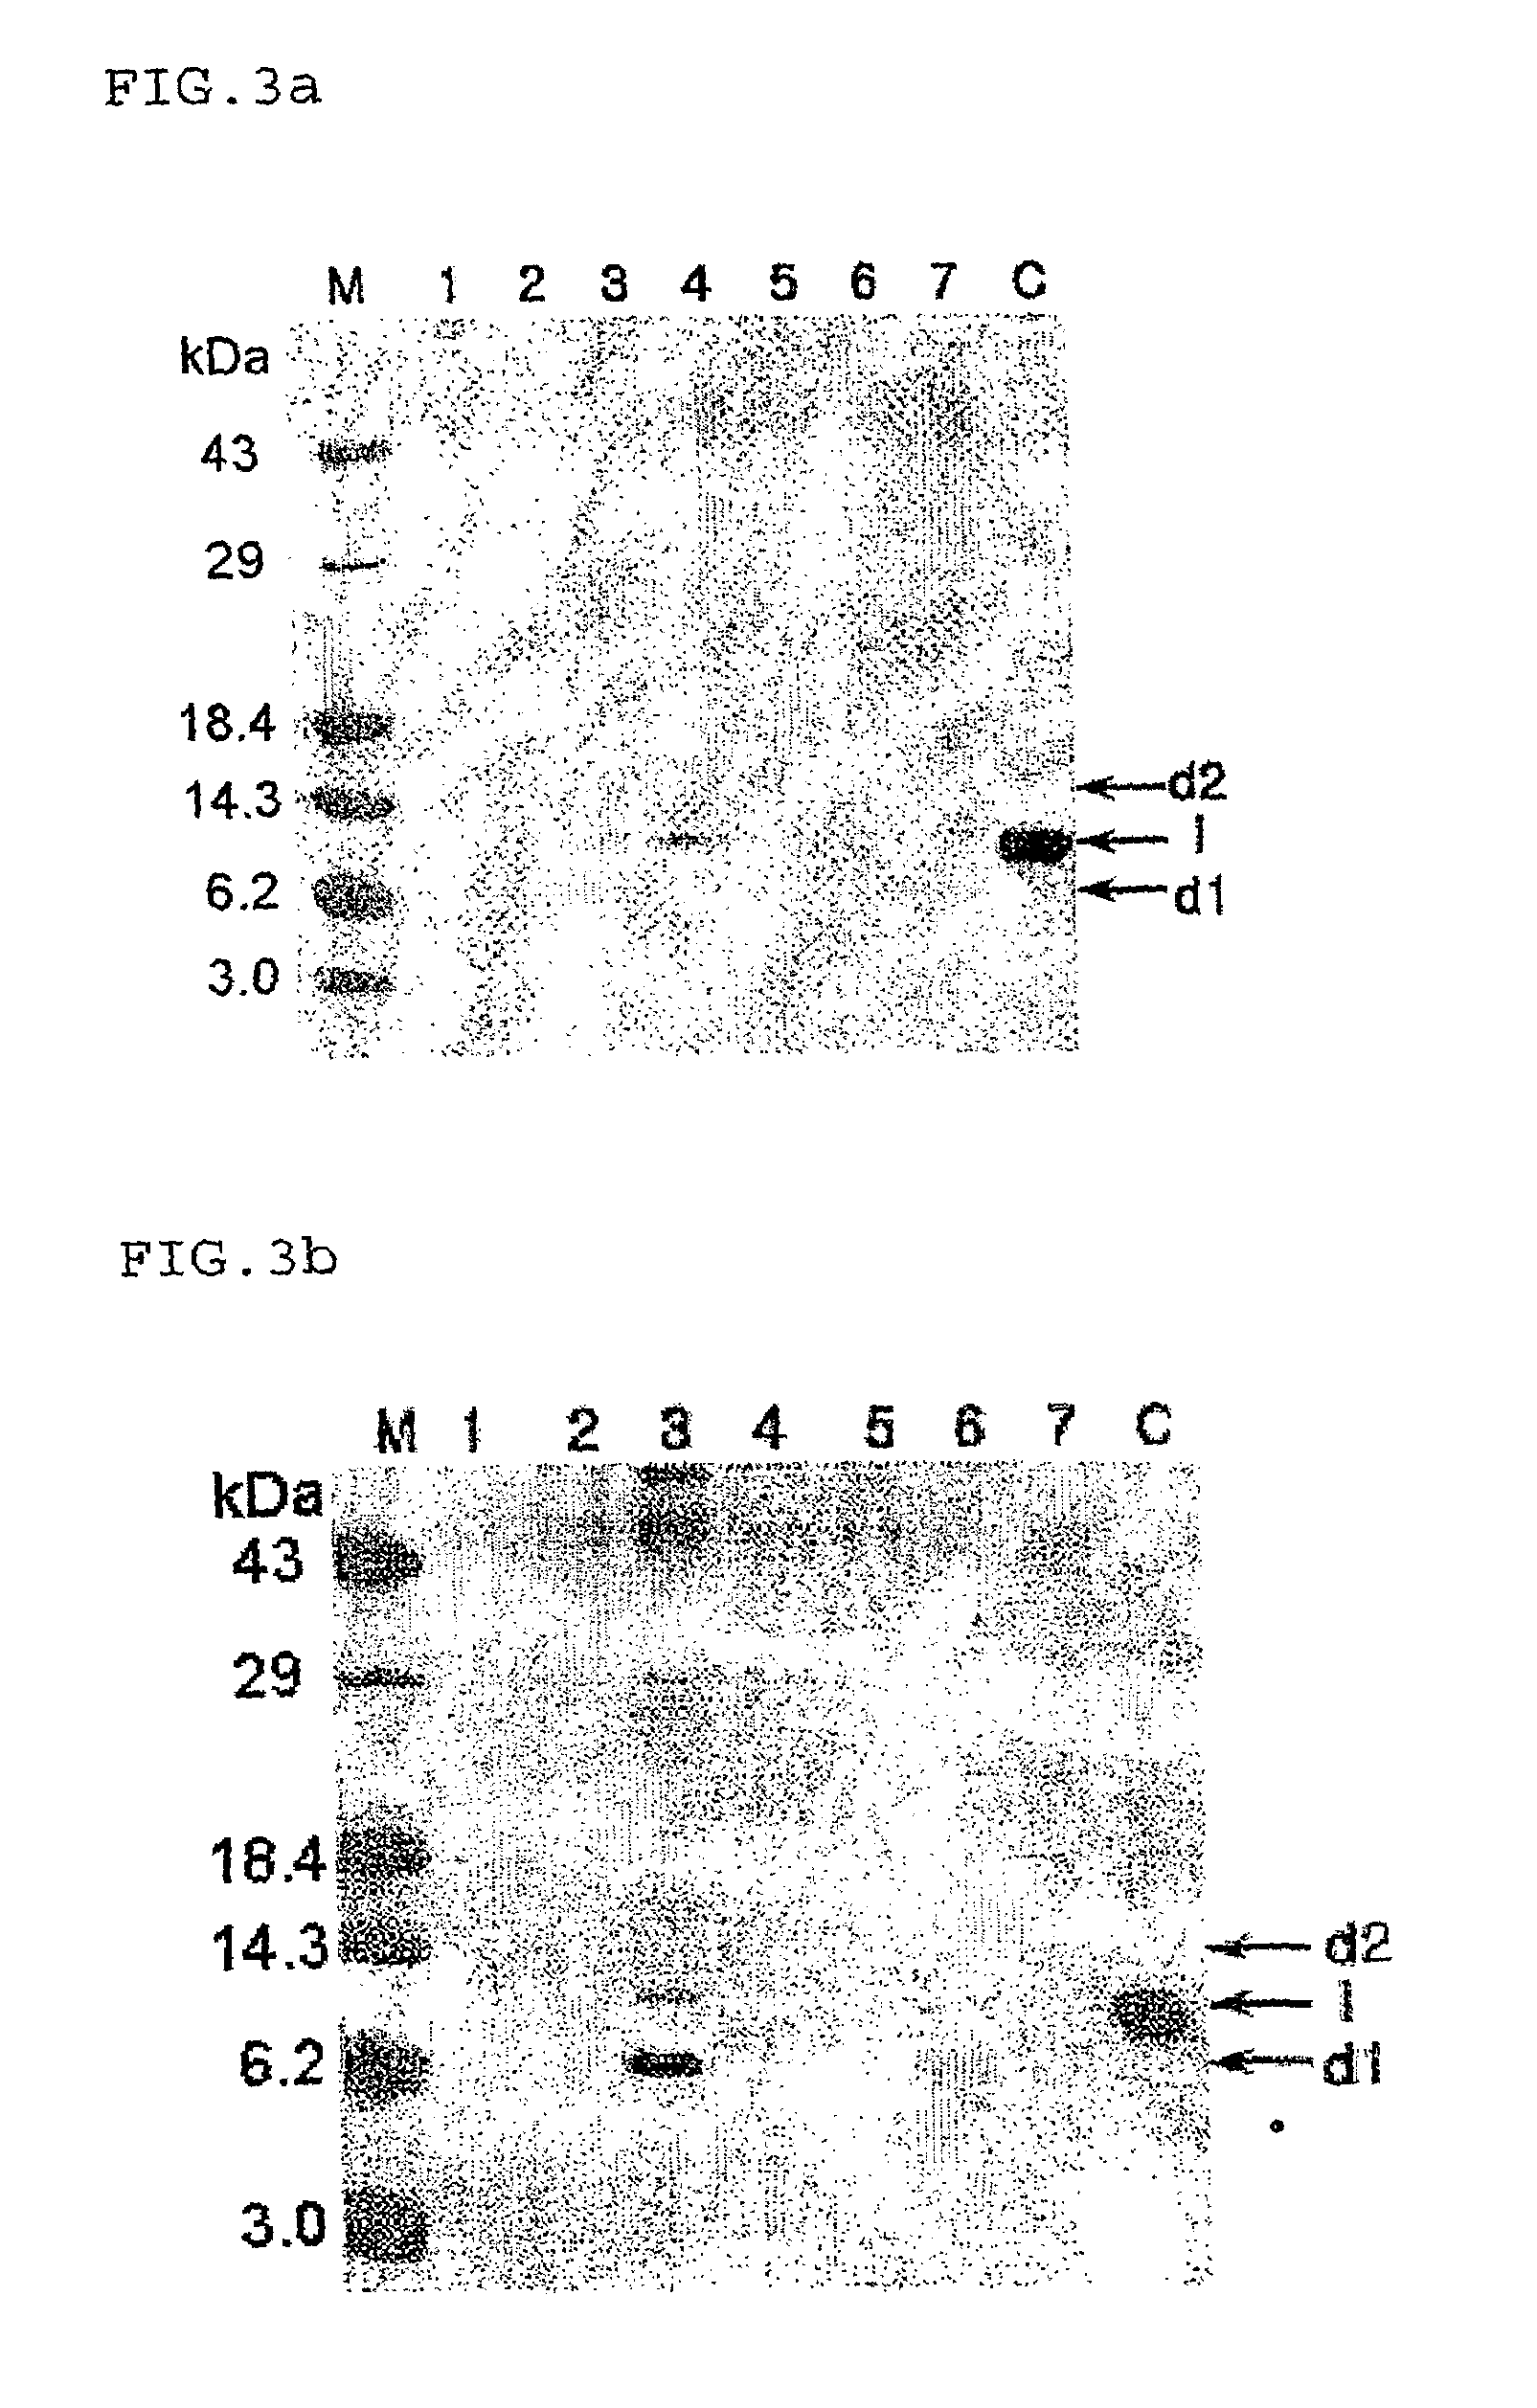 Yeast transformant producing recombinant human parathyroid hormone and method for producing the hormone